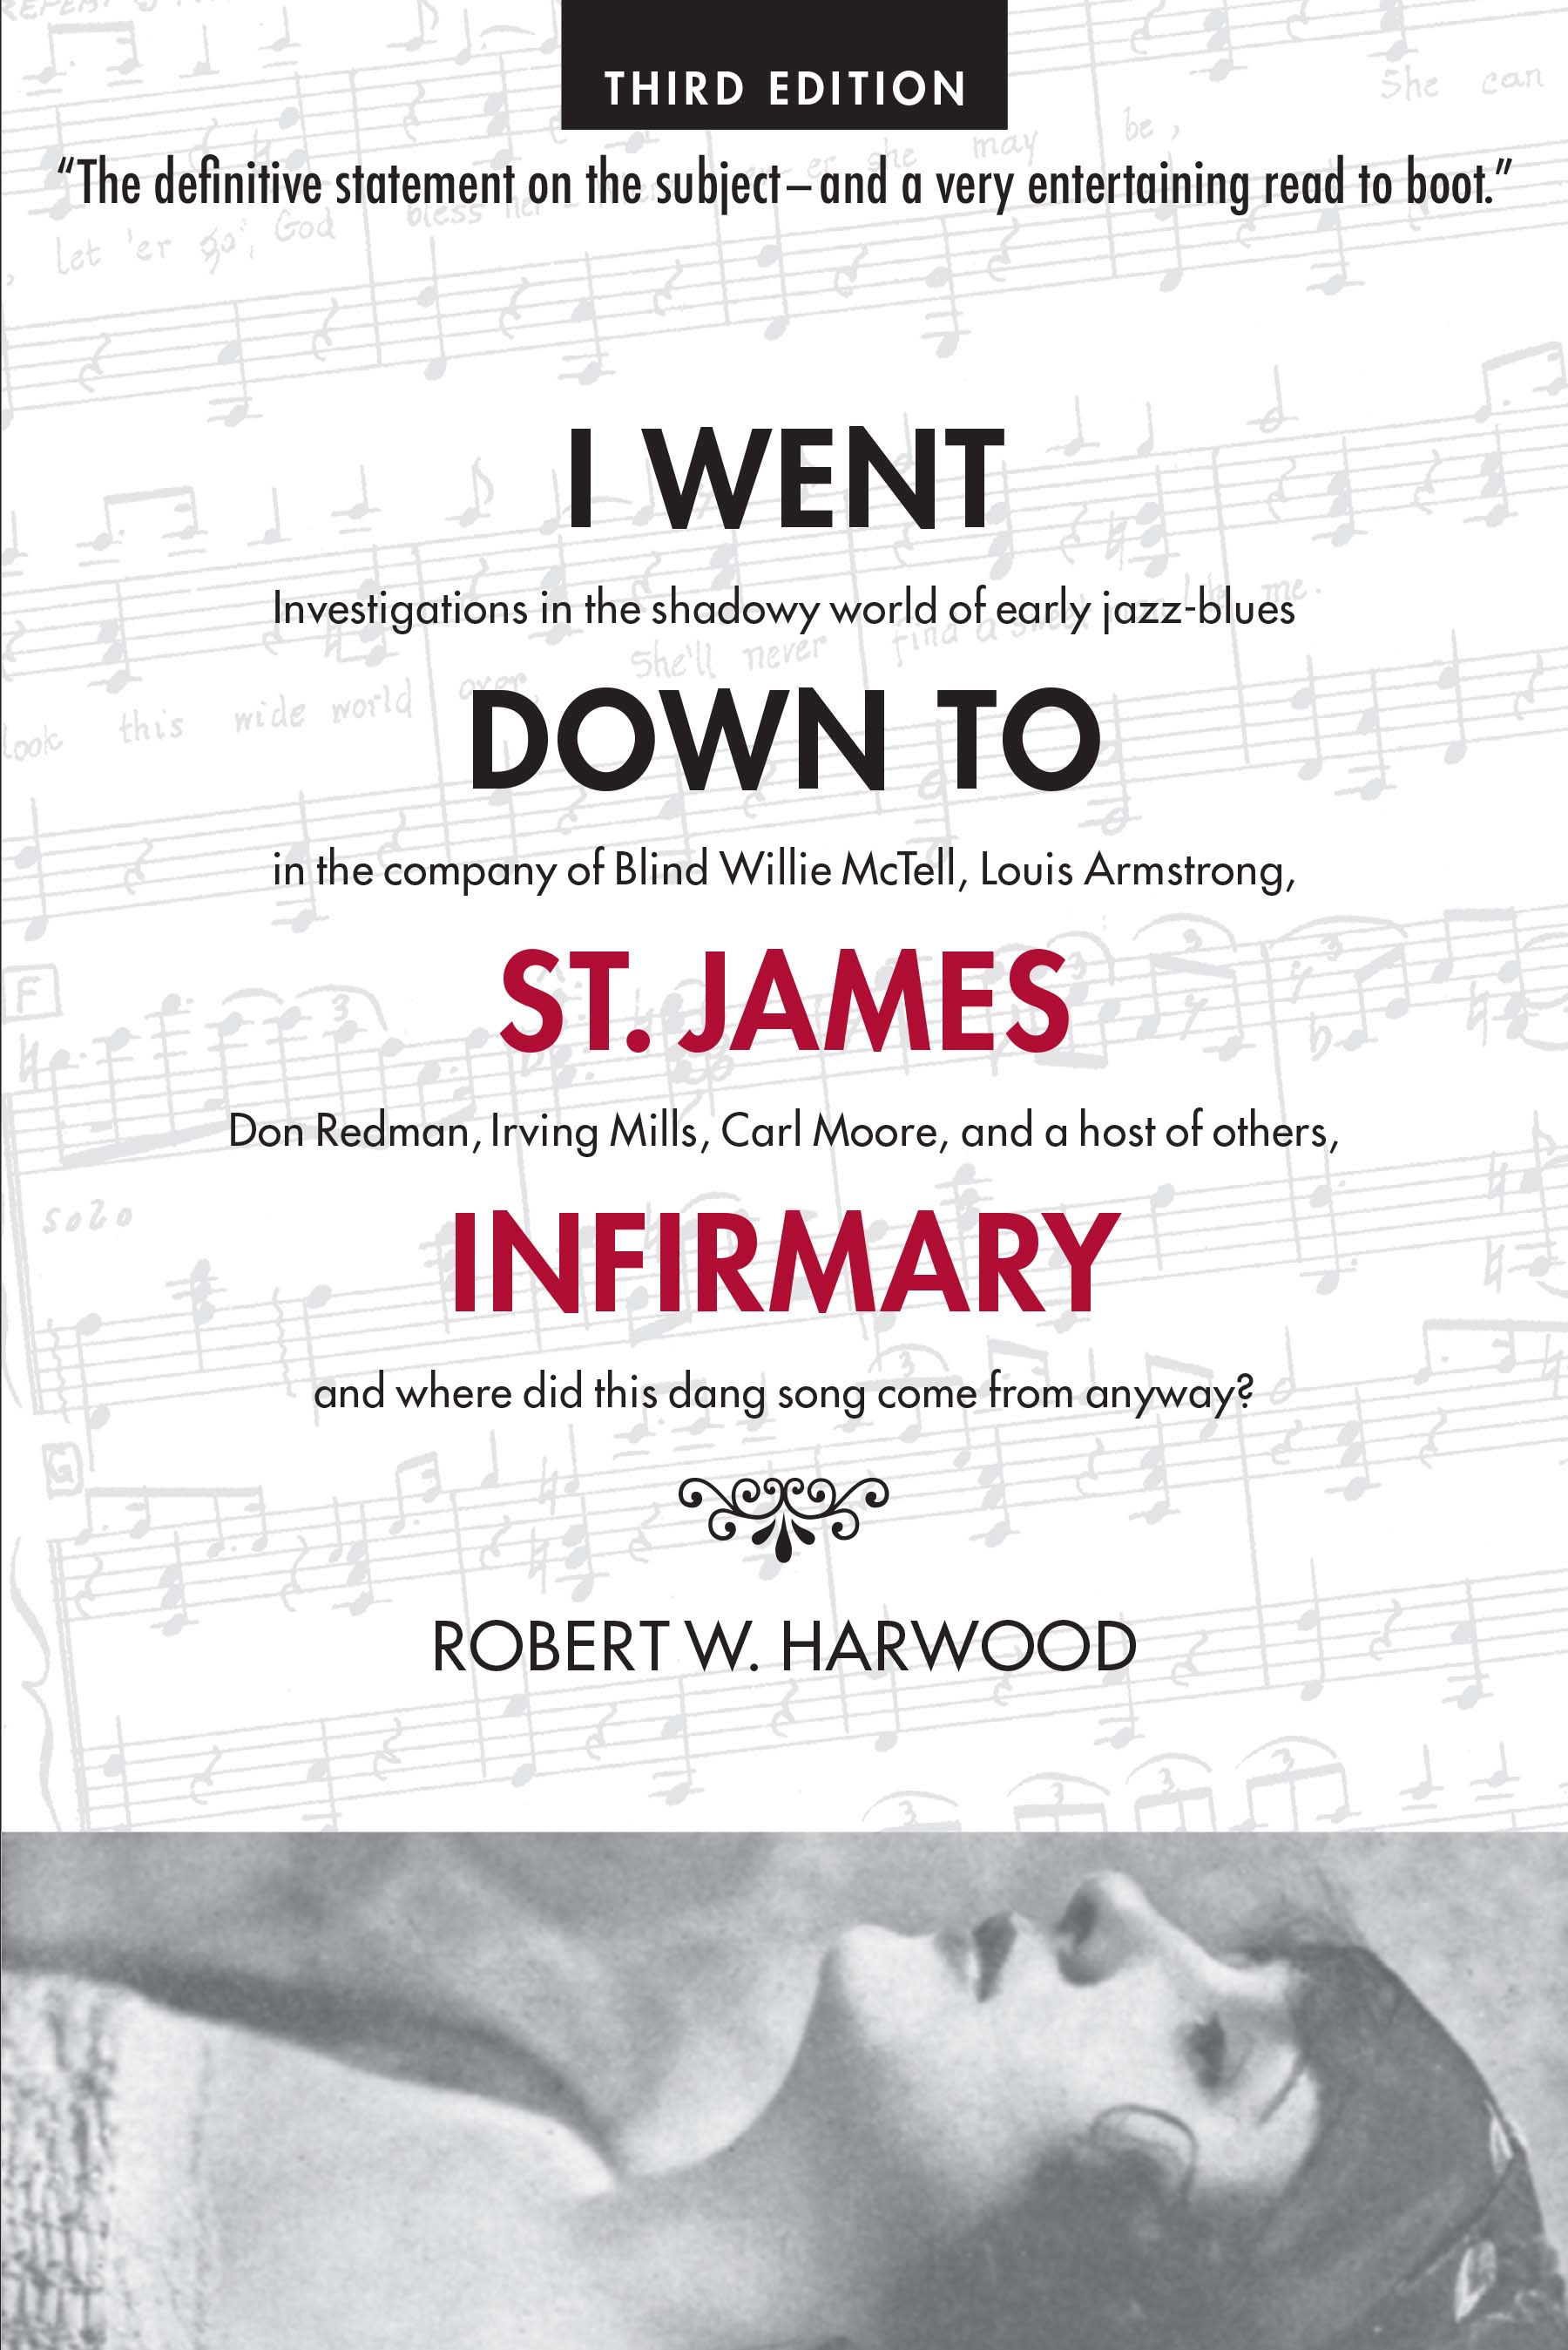 i-went-down-to-st-james-infirmary